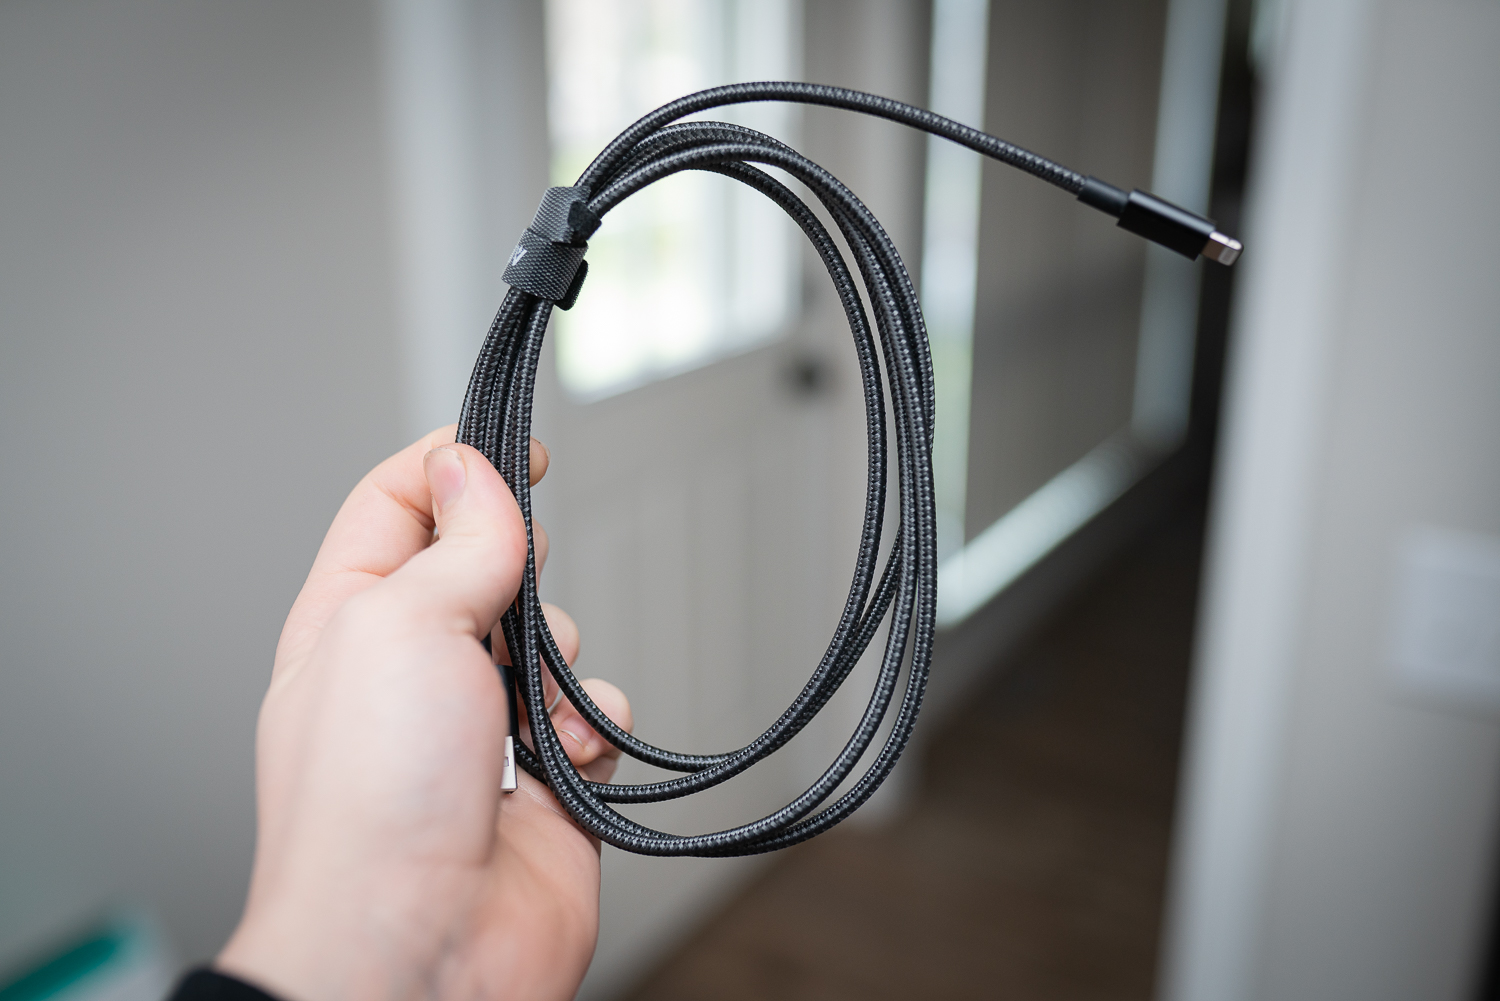 https://www.digitaltrends.com/wp-content/uploads/2022/03/cable-wrapped.jpg?fit=720%2C720&p=1